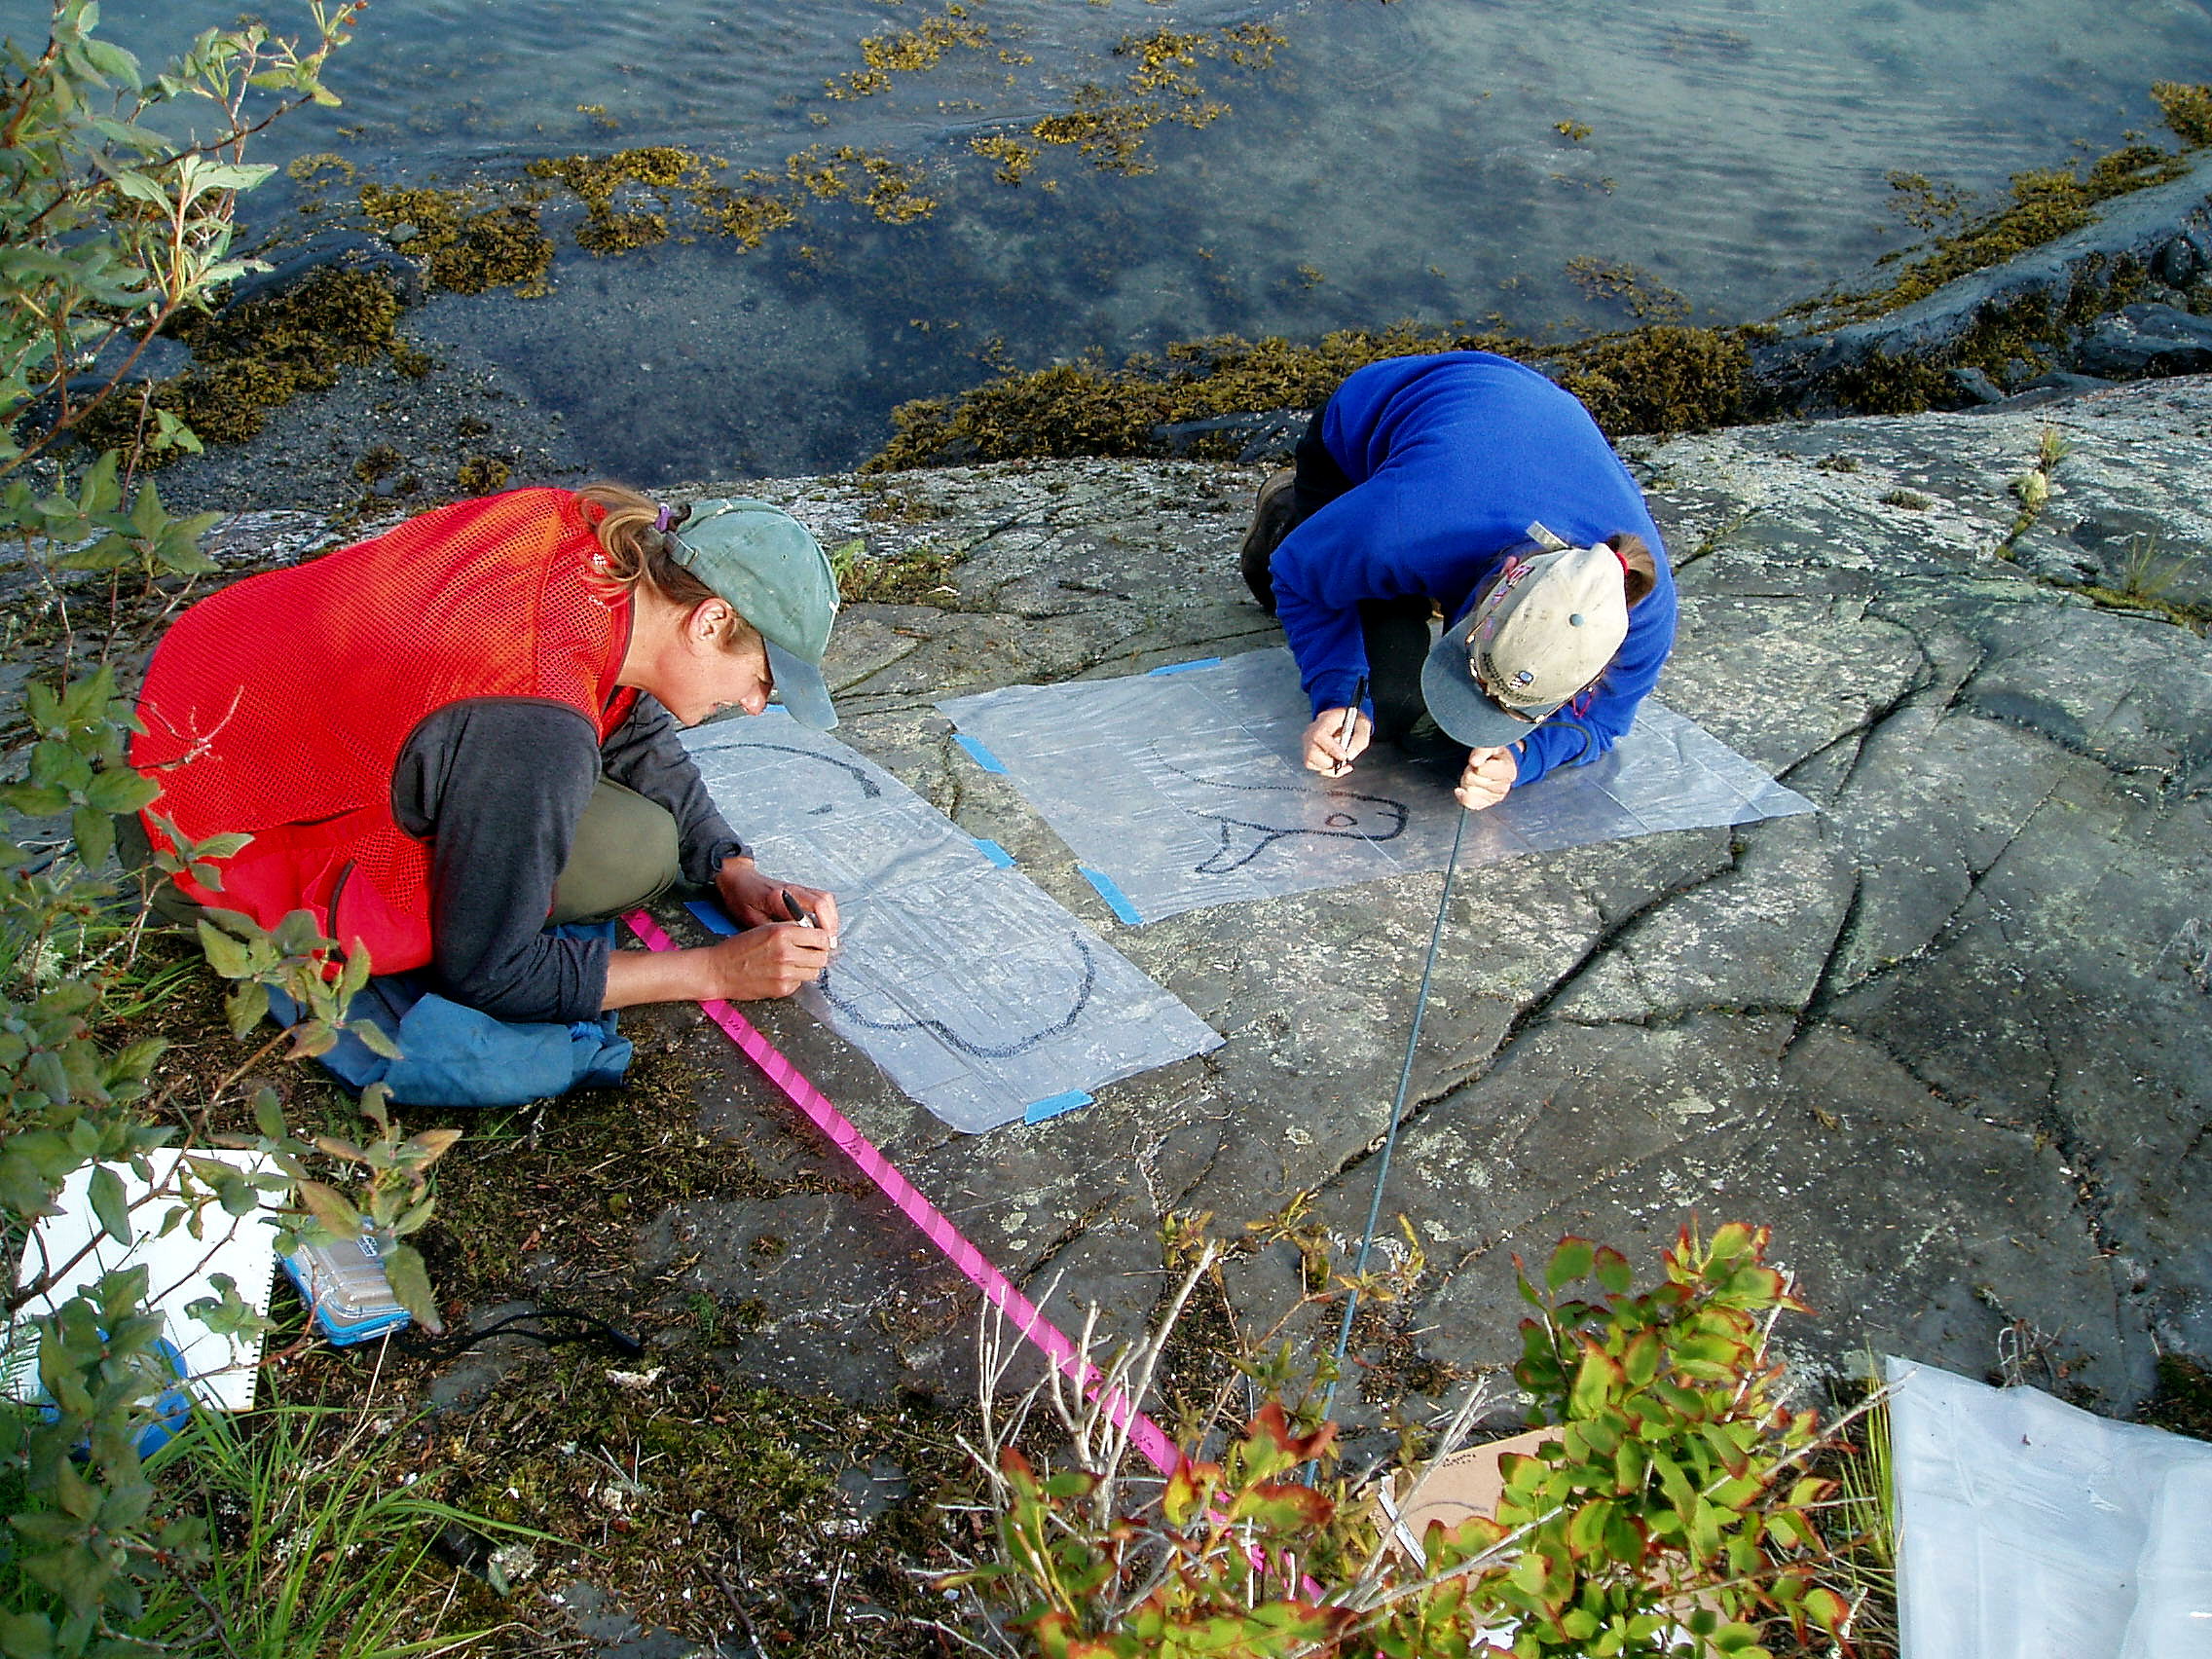 U.S. Forest Service Archaeologists, Jane Smith and Gina Esposito, record petroglyphs on the side of a rocky wall. (Photo courtesy of the U.S. Forest Service)